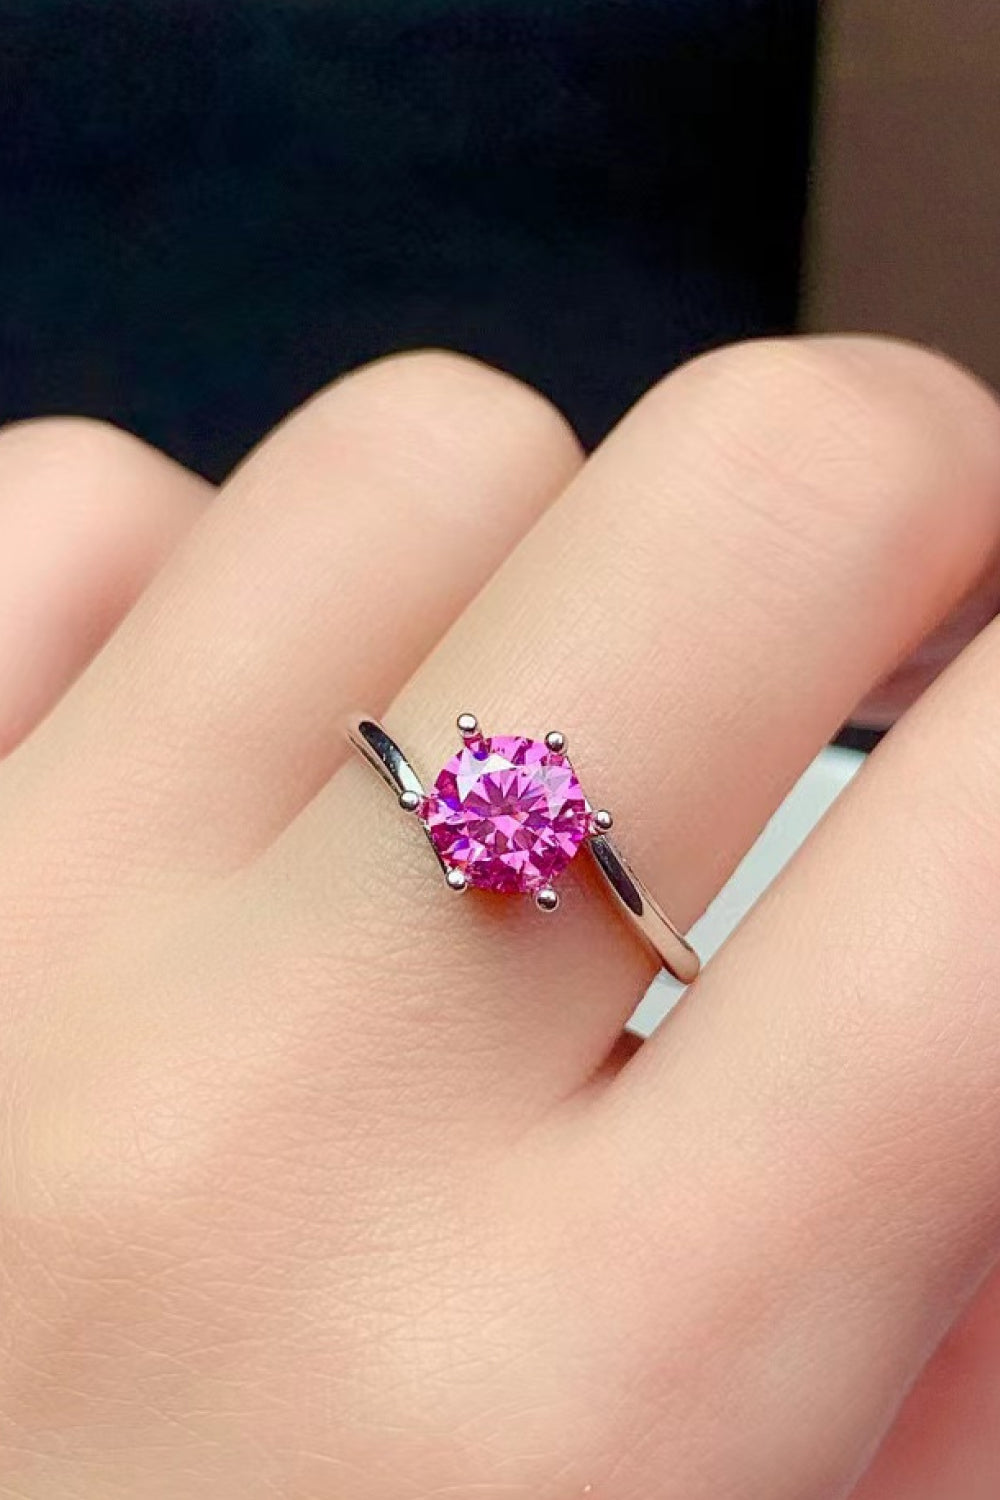 Can't Stop Your Shine 1 Carat Moissanite Ring Pink